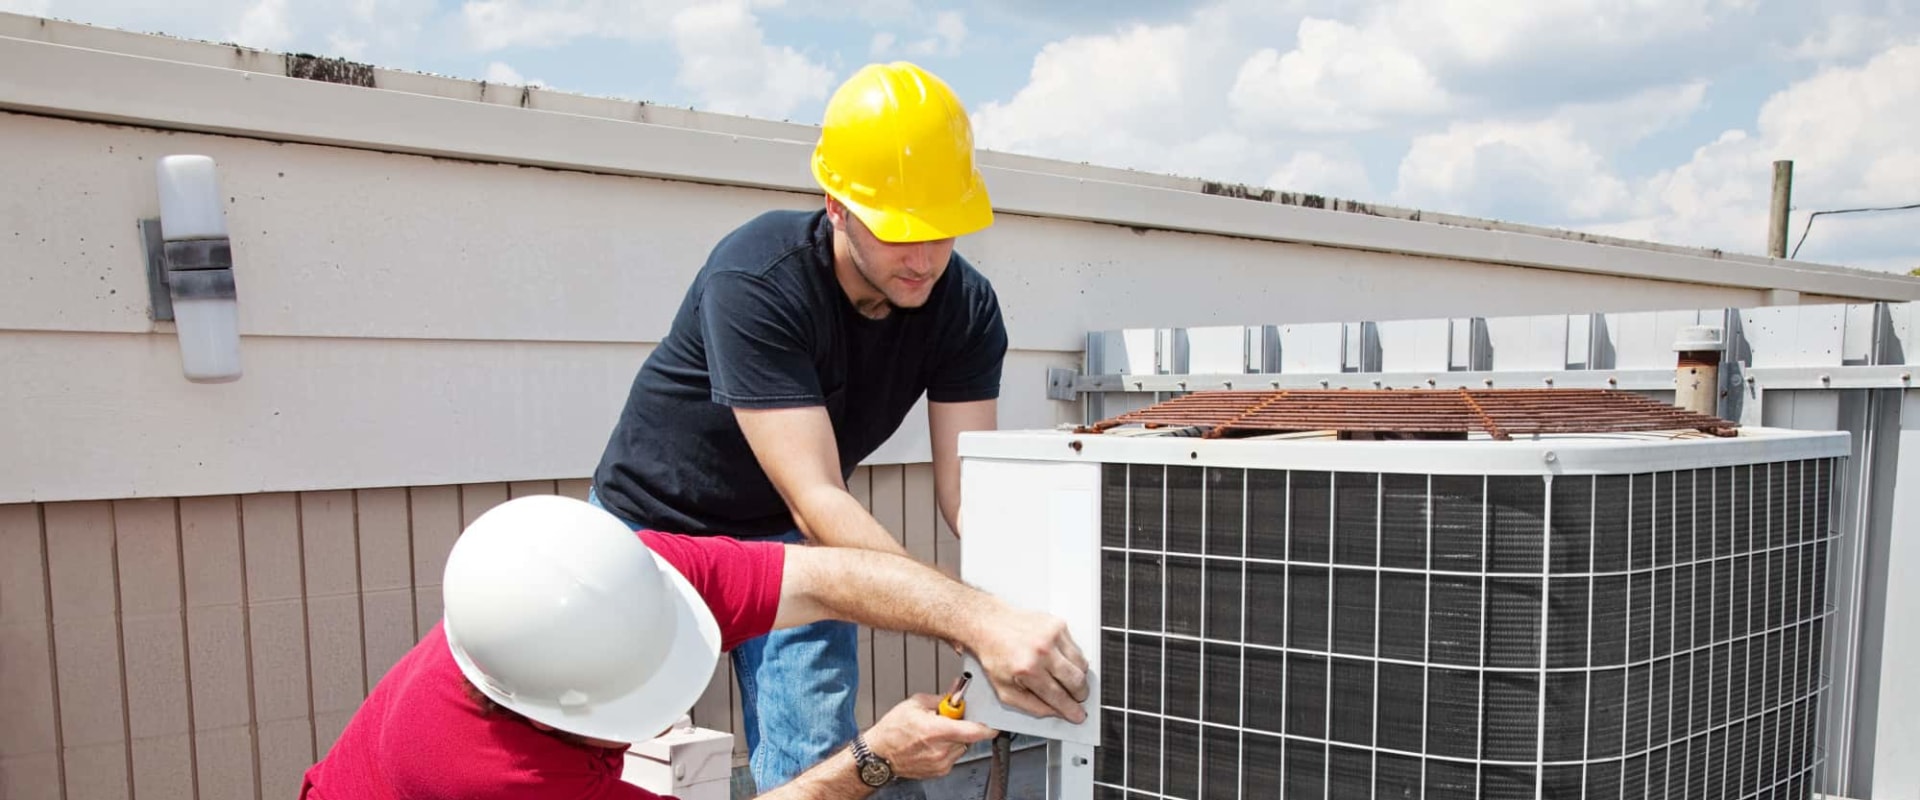 Trusted HVAC Air Conditioning Repair Services In Key Biscayne FL